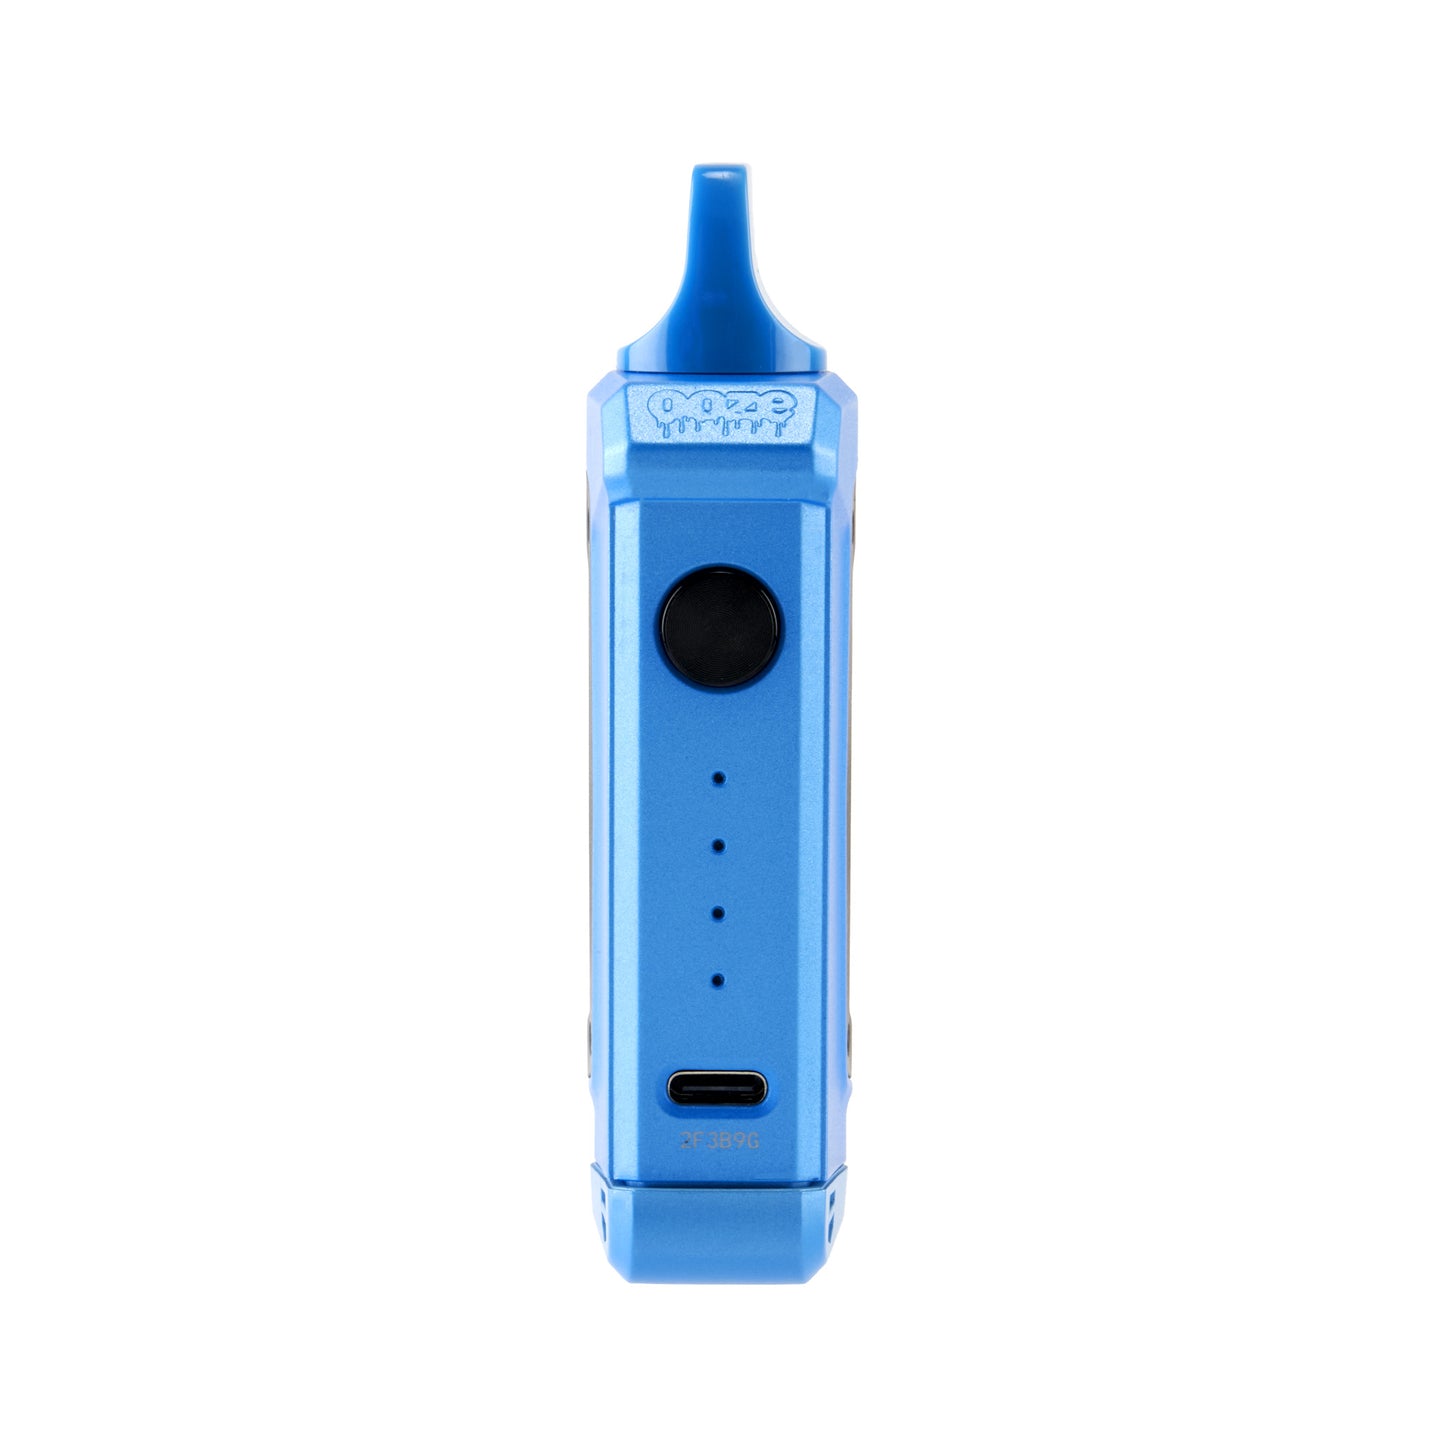 The arctic blue Ooze Duplex 2 extract vaporizer is shown with the magnetic plate removed to show the interface